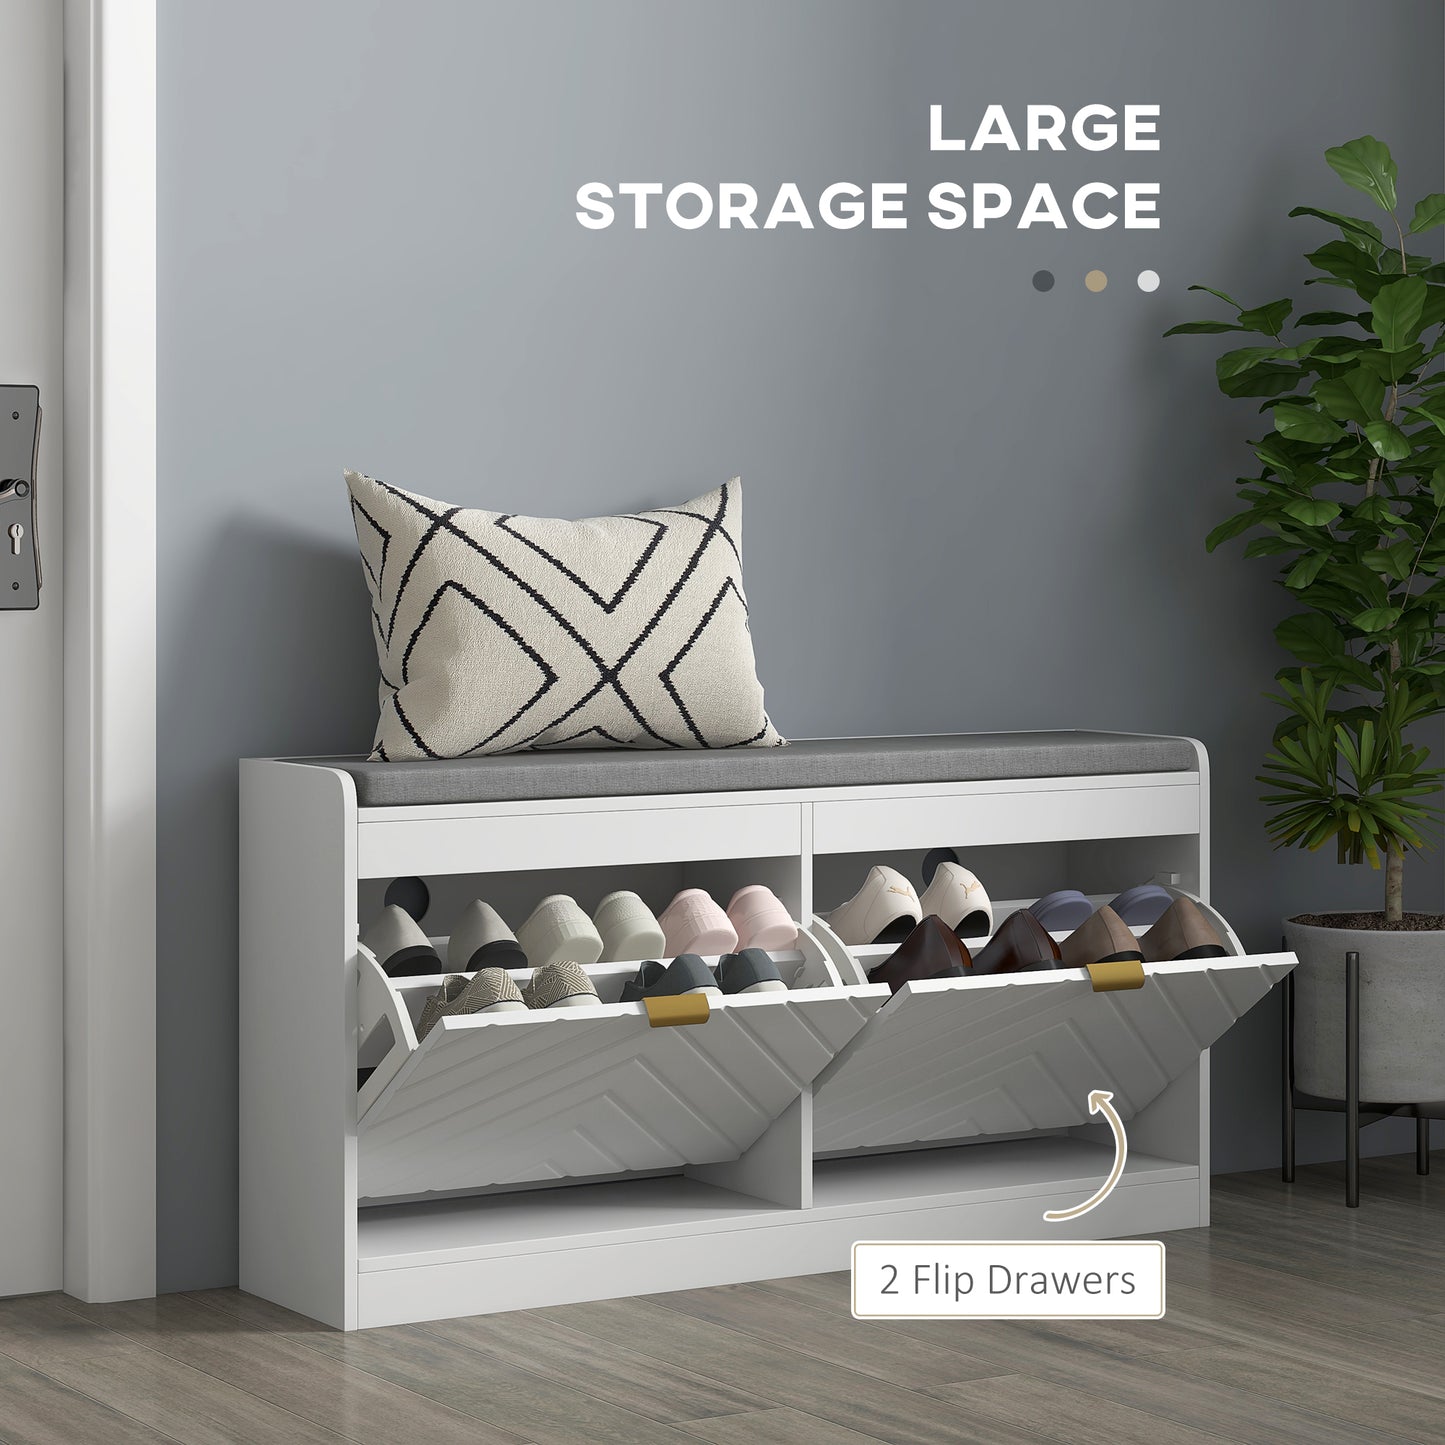 Shoe Storage with Seat, Upholstered Hallway Bench, Shoe Bench with 2 Flip Drawers and 2 Vents for 8 Pairs of Shoes